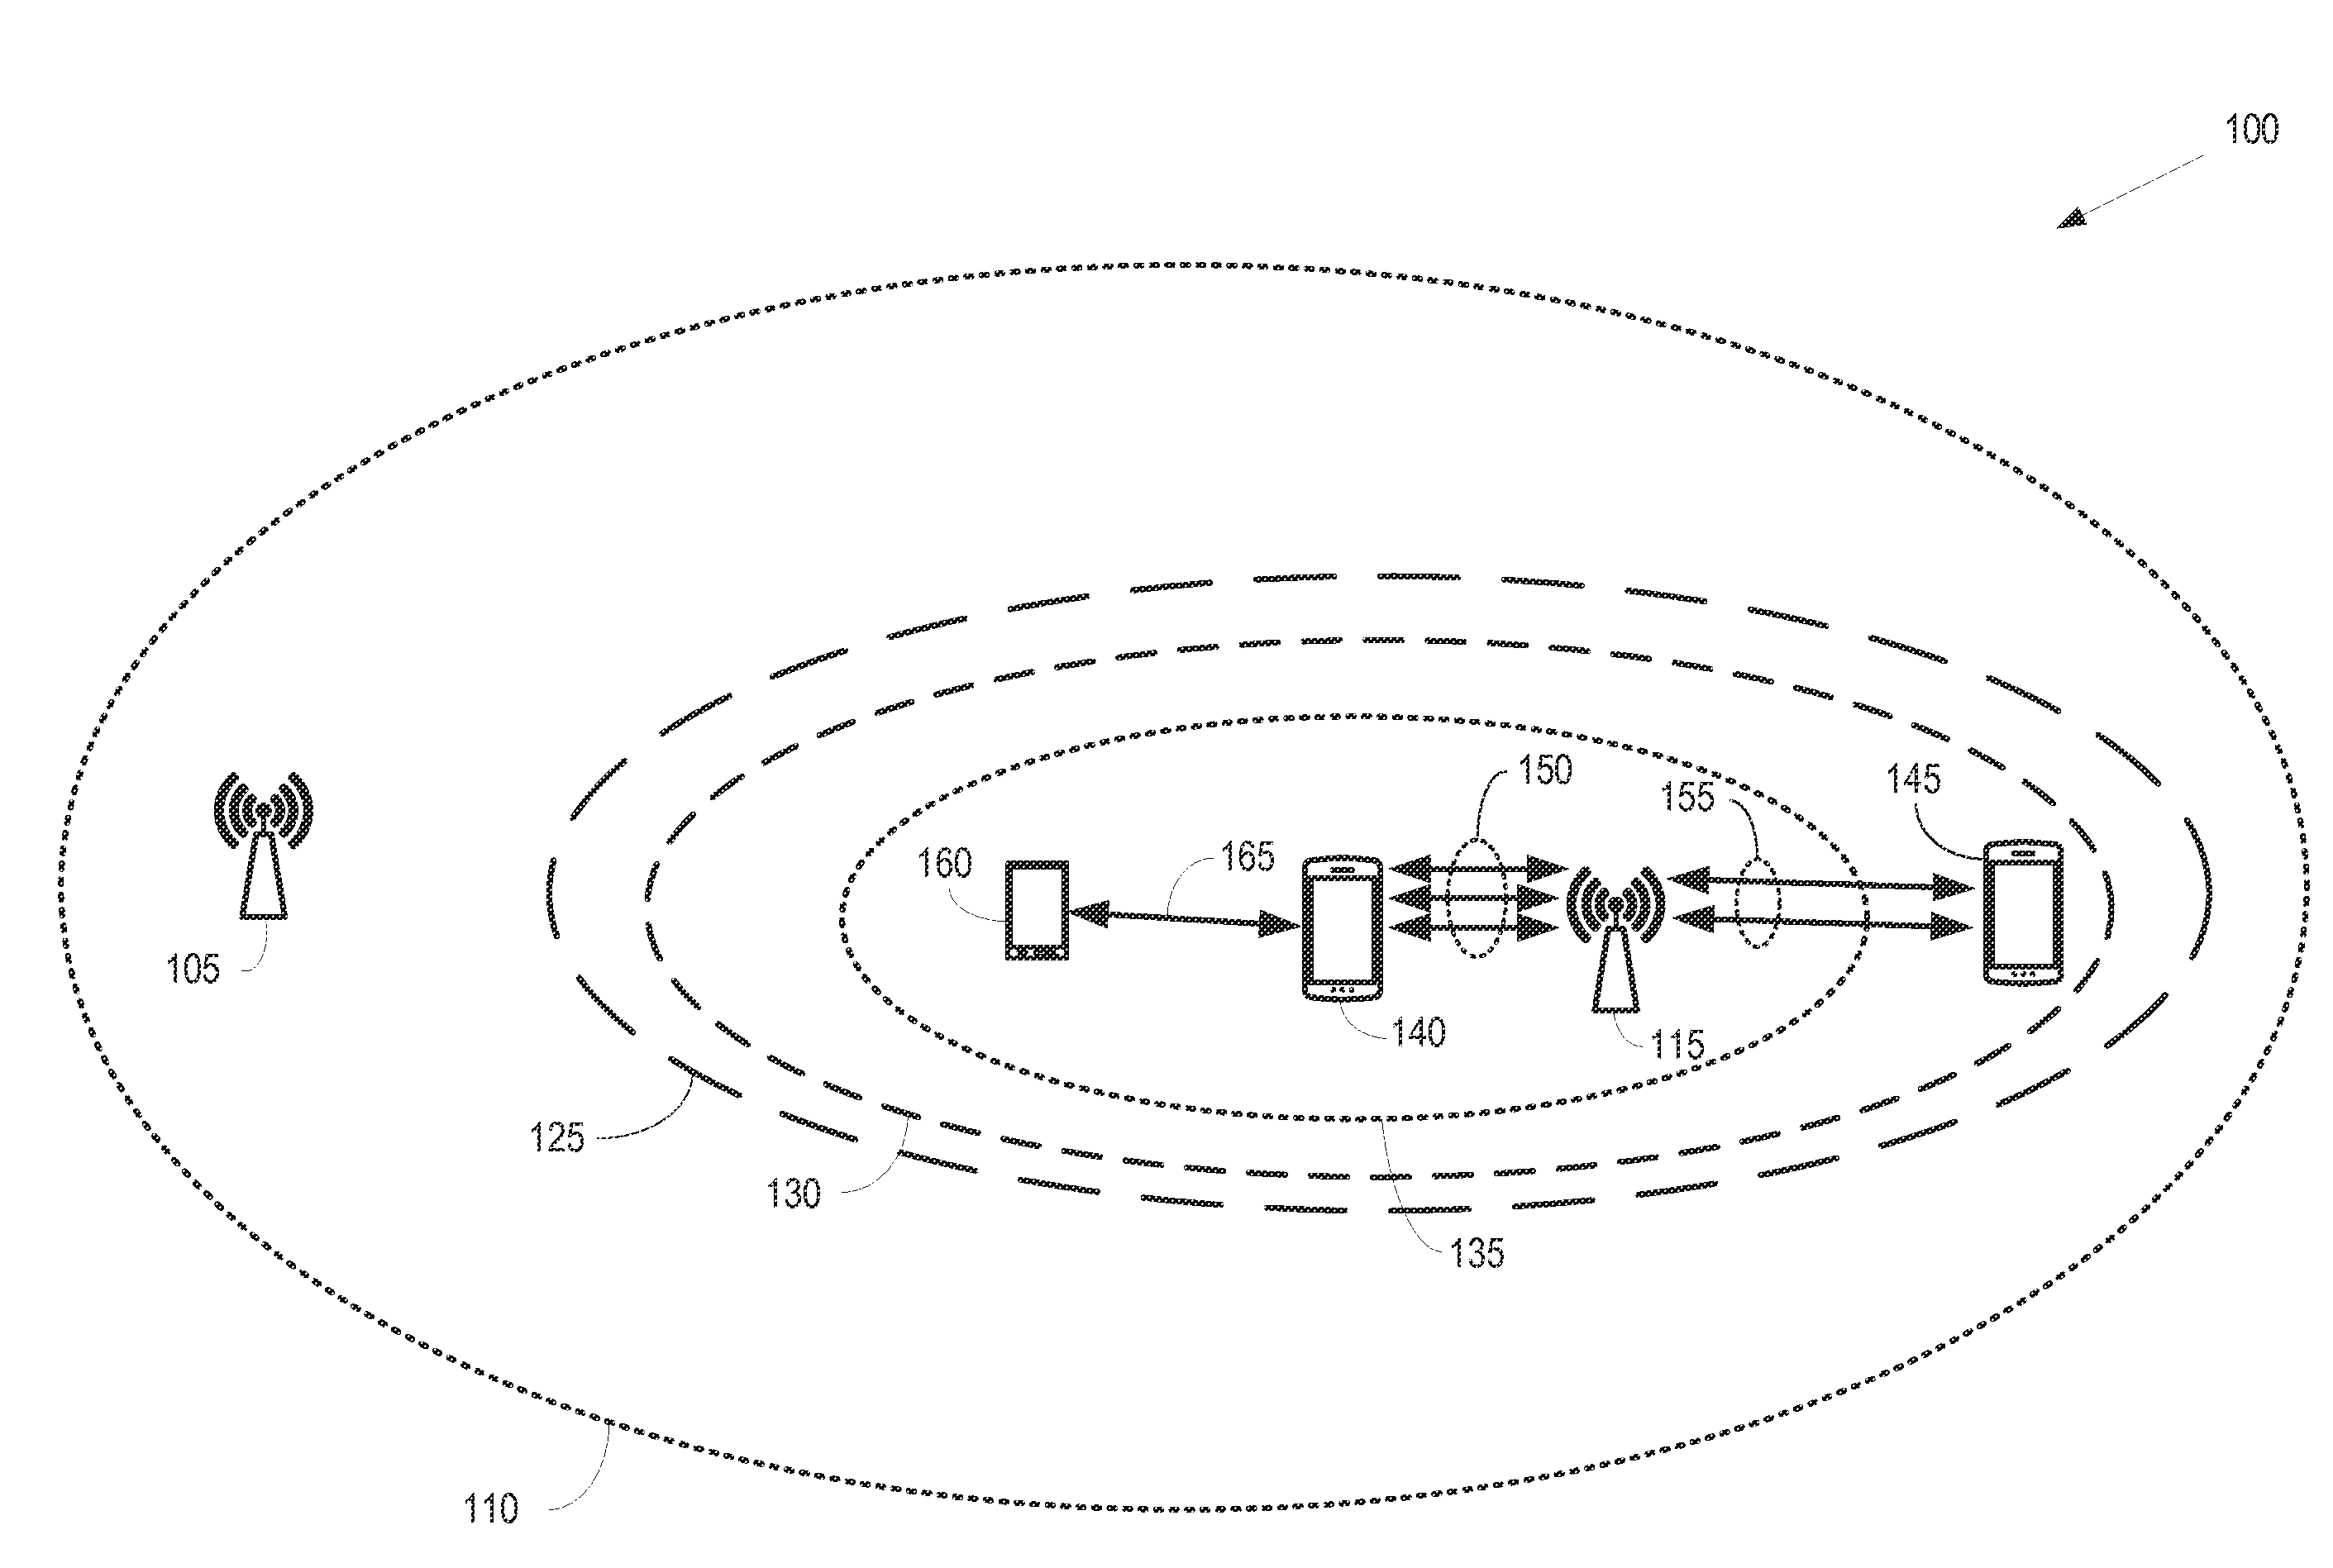 Allocation of unlicensed frequency bands for a wireless hotspot